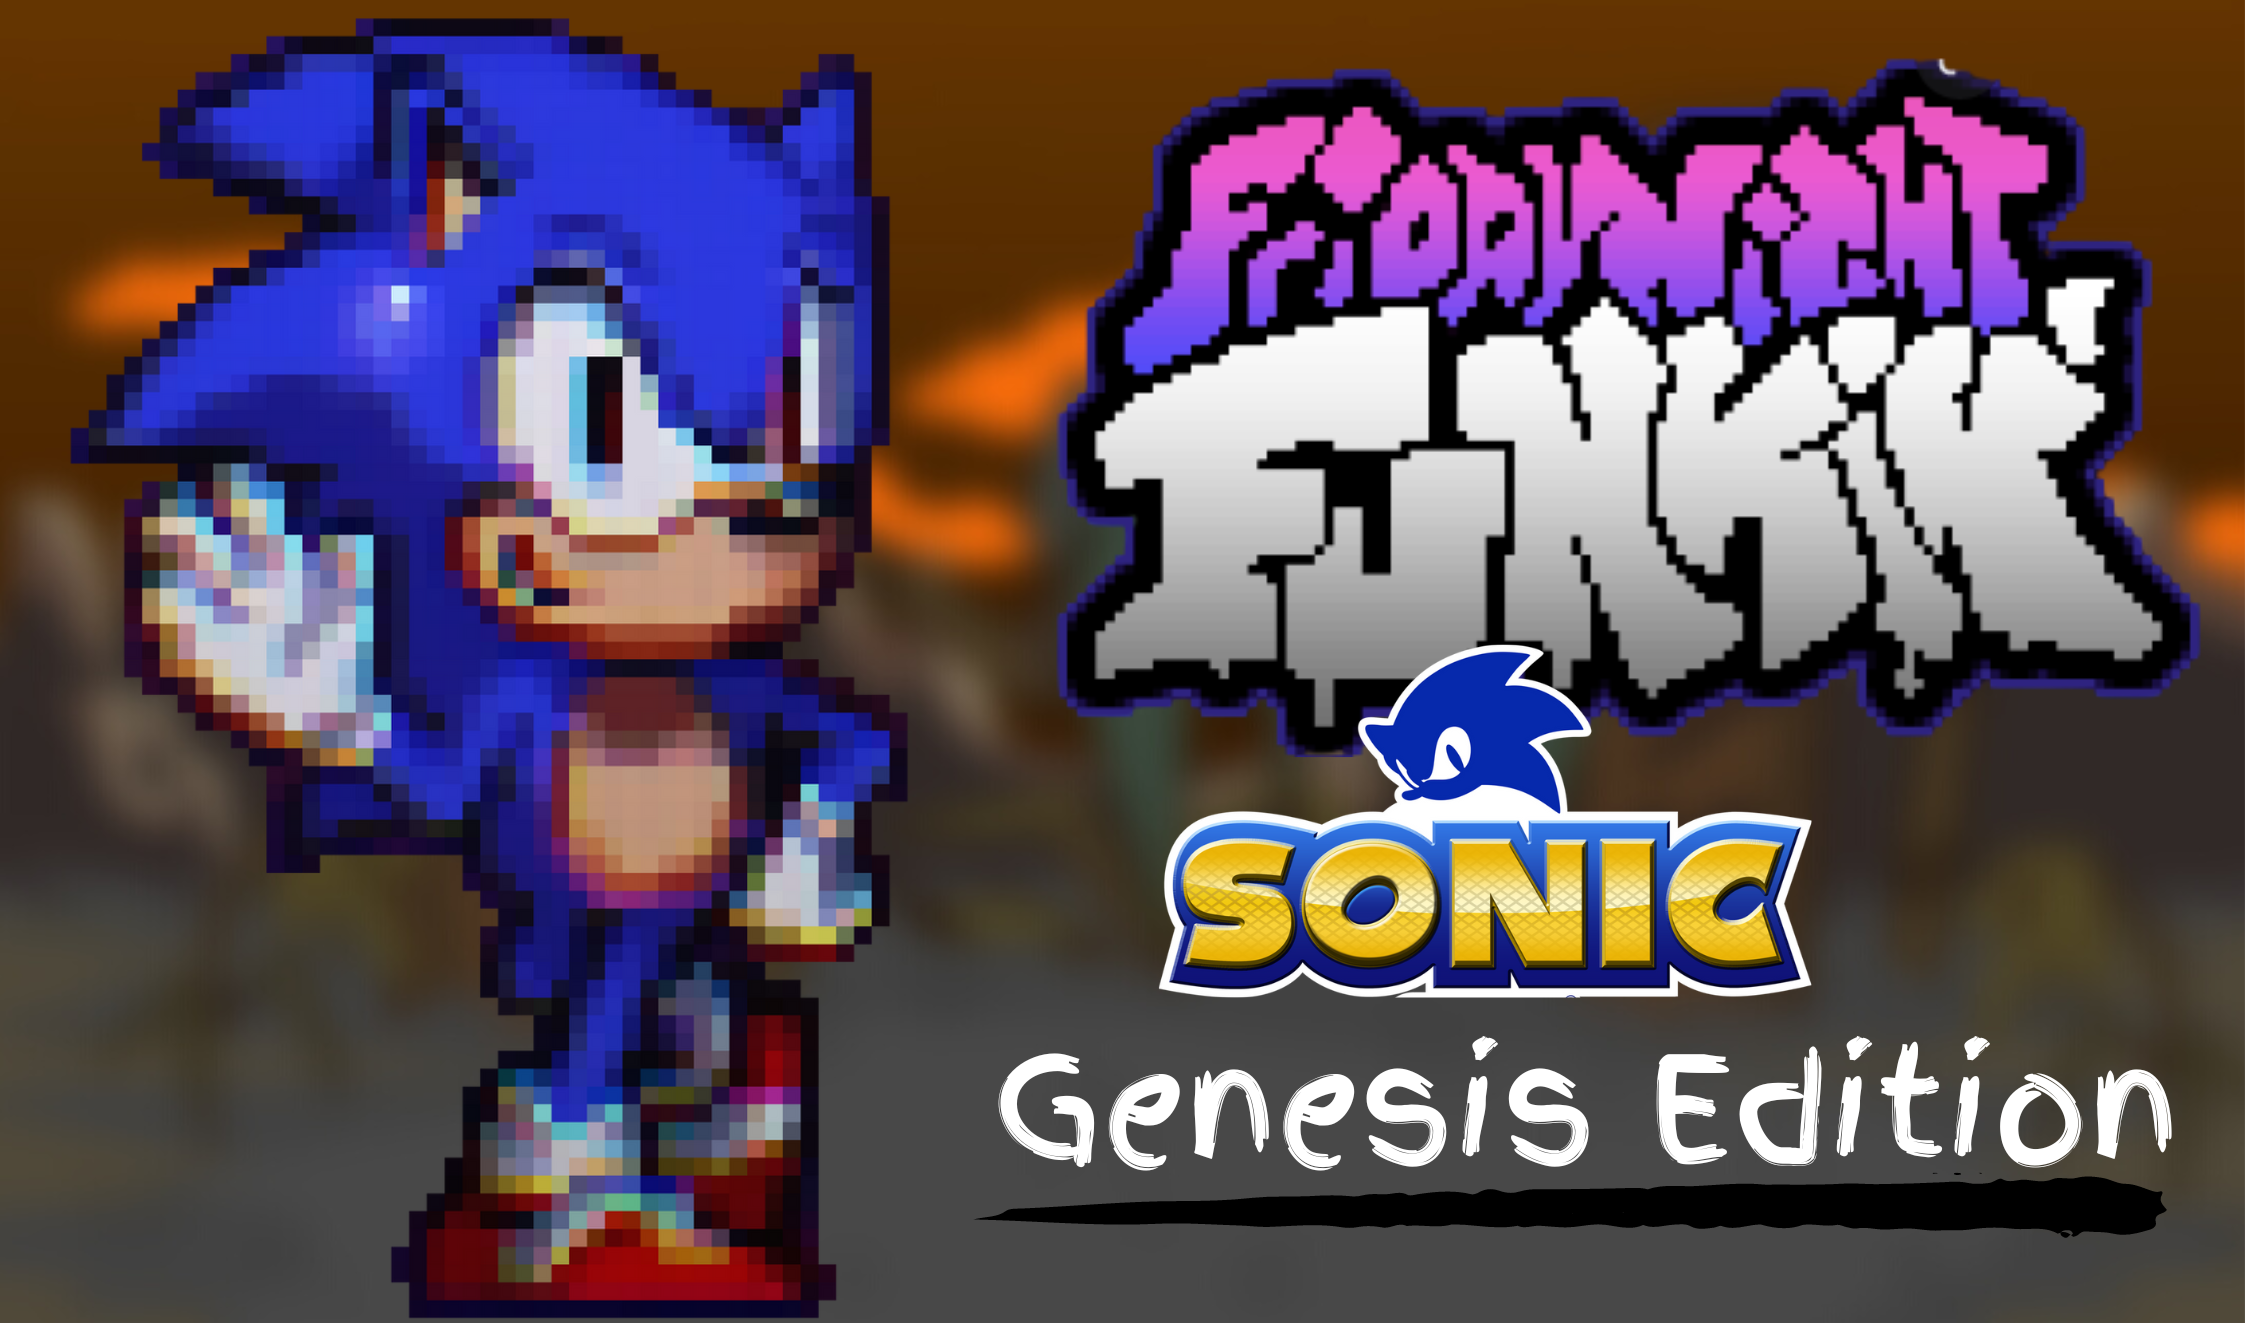 Every Generic FNF Sonic.exe Song With Genesis Instrumentation (2022) MP3 -  Download Every Generic FNF Sonic.exe Song With Genesis Instrumentation  (2022) Soundtracks for FREE!